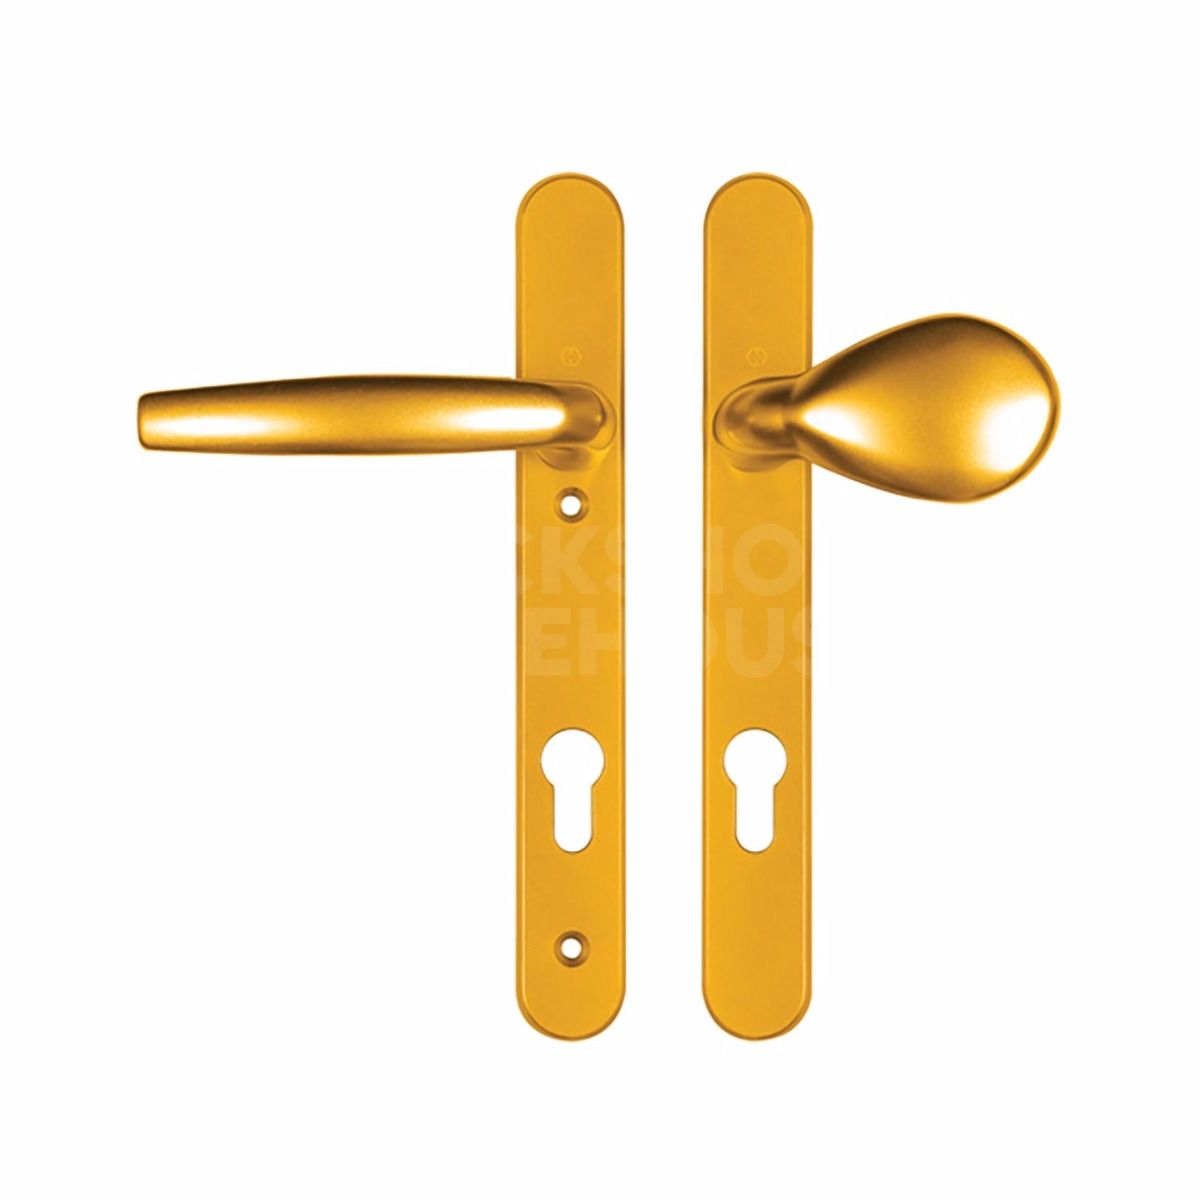 Hoppe UPVC Lever - Movable Pad handles 92mm centres